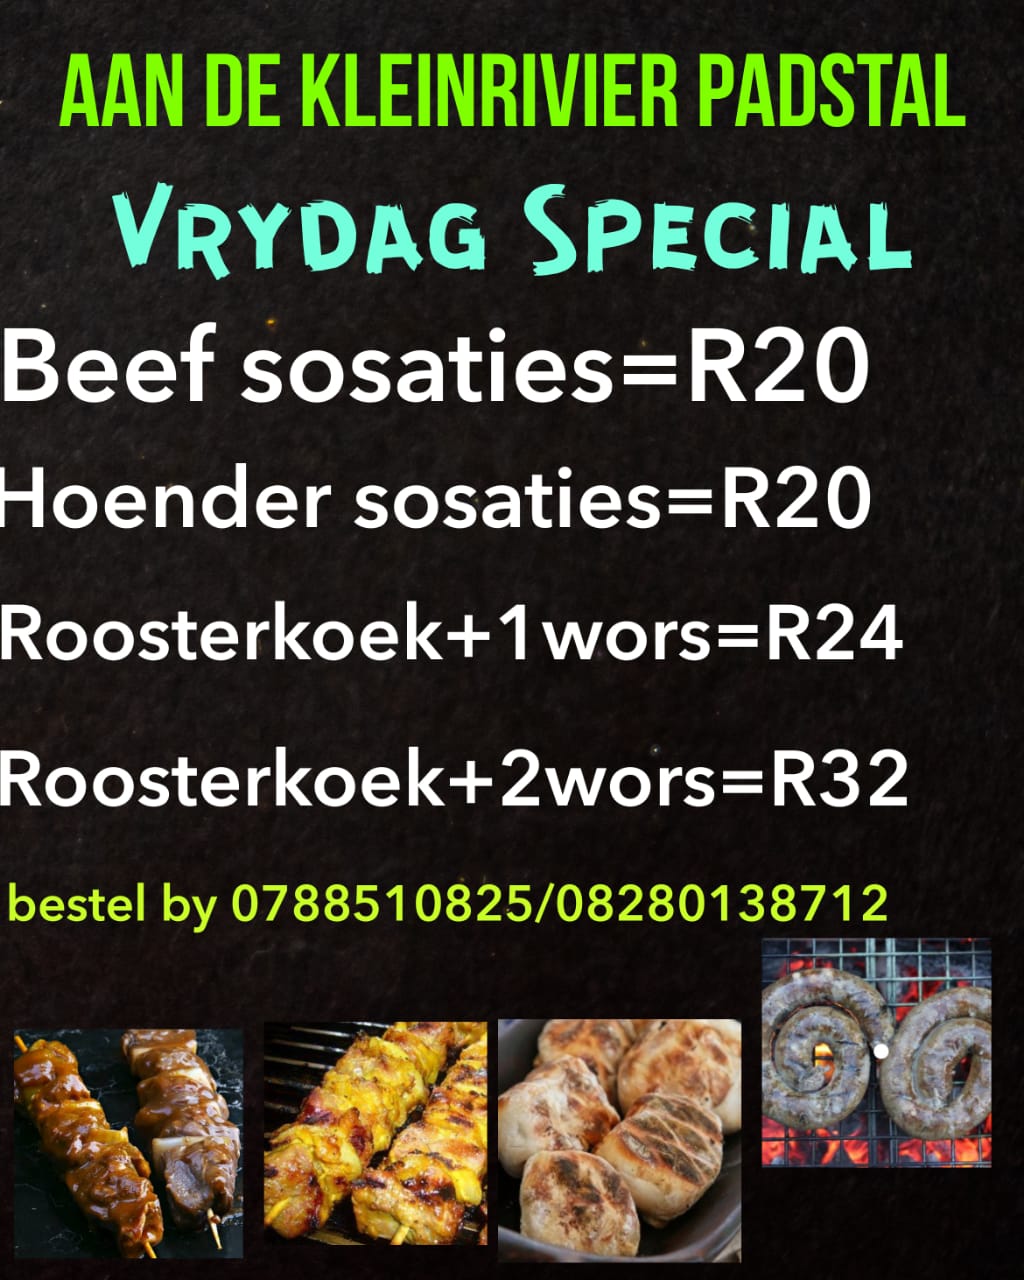 friday special advert, please call for information on specials